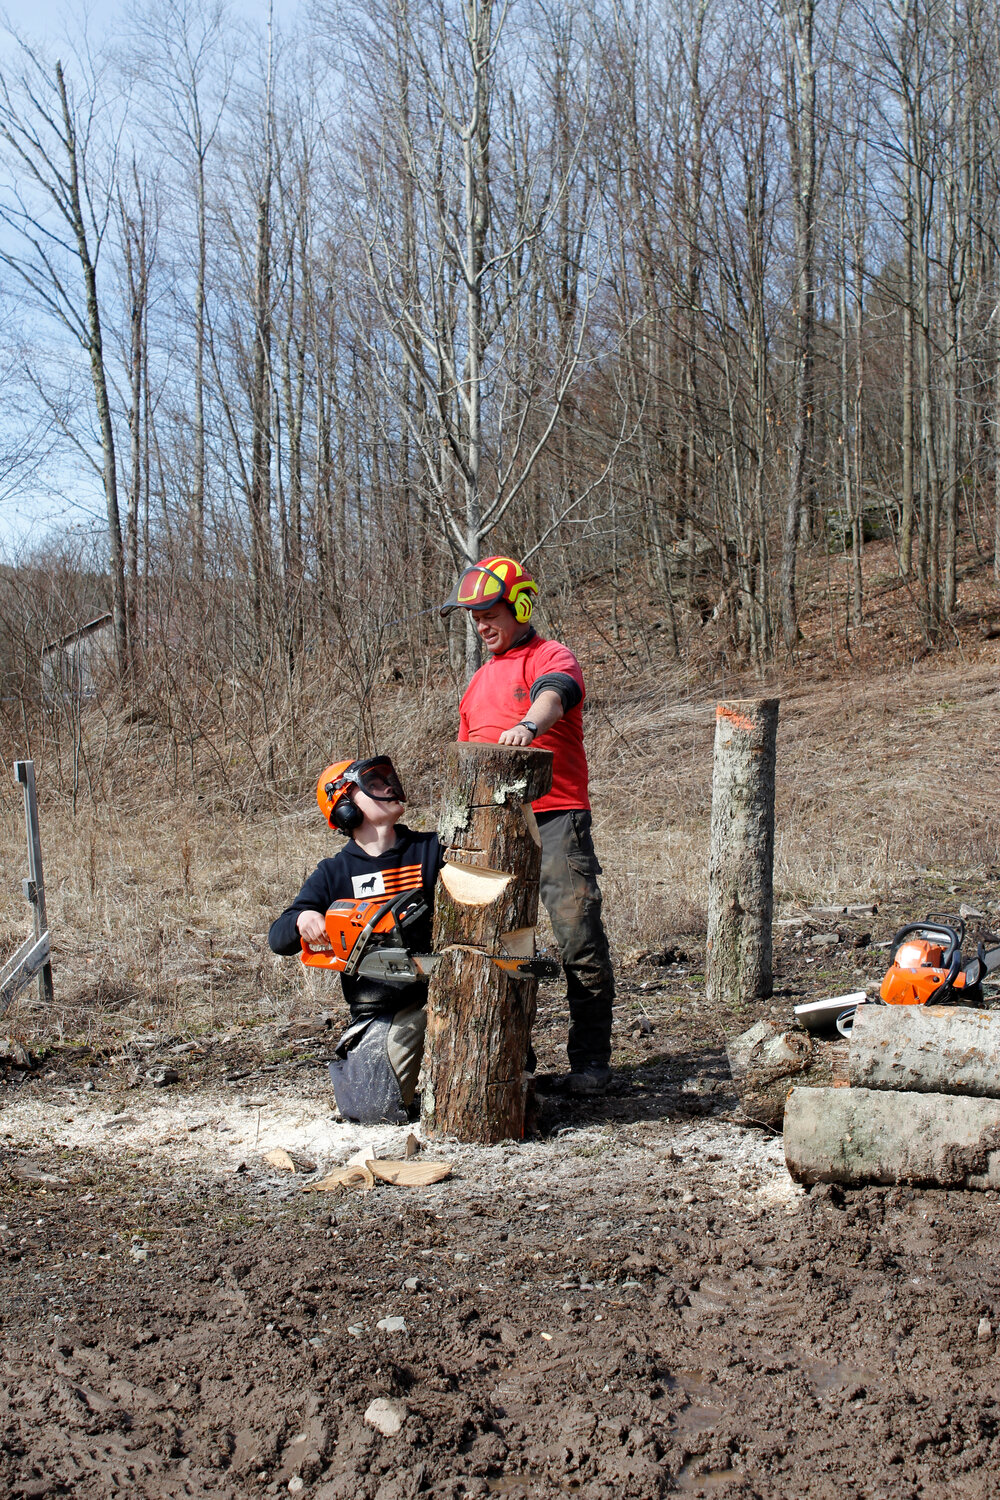 Student Jacob Butts looks to Game of Logging instructor Bill Lindloff for feedback on his just-completed cut during a chainsaw skills workshop at the DCMO BOCES Harrold Campus last week.